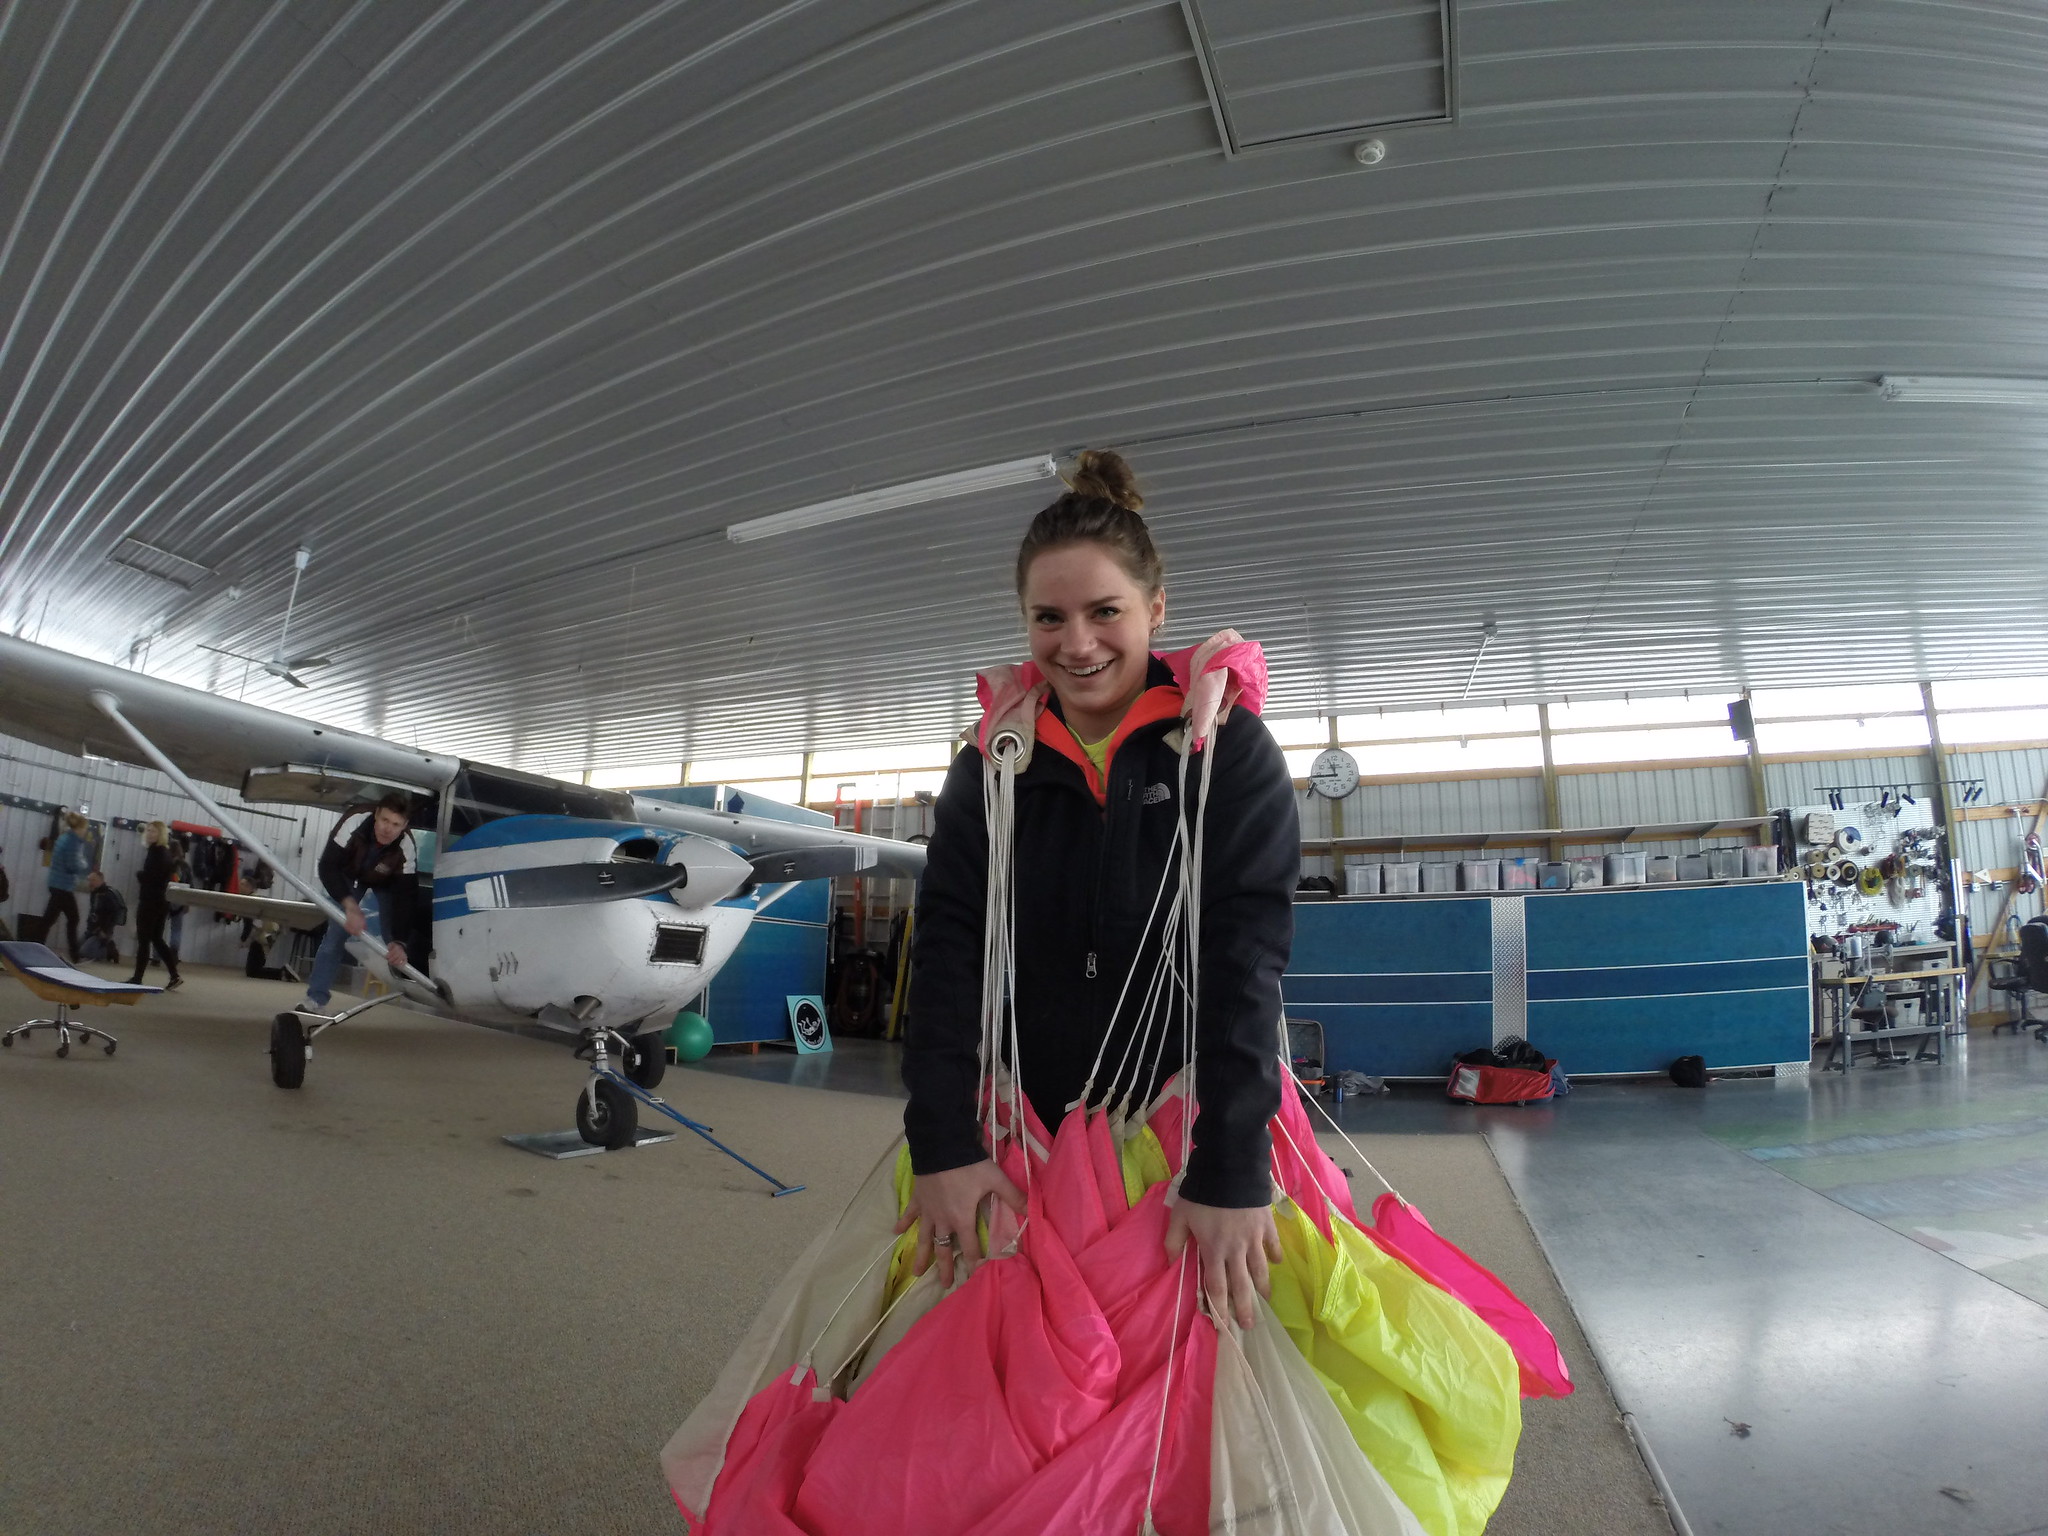 A young lady packing her parachute in the hangar at Wisconsin Skydiving Center